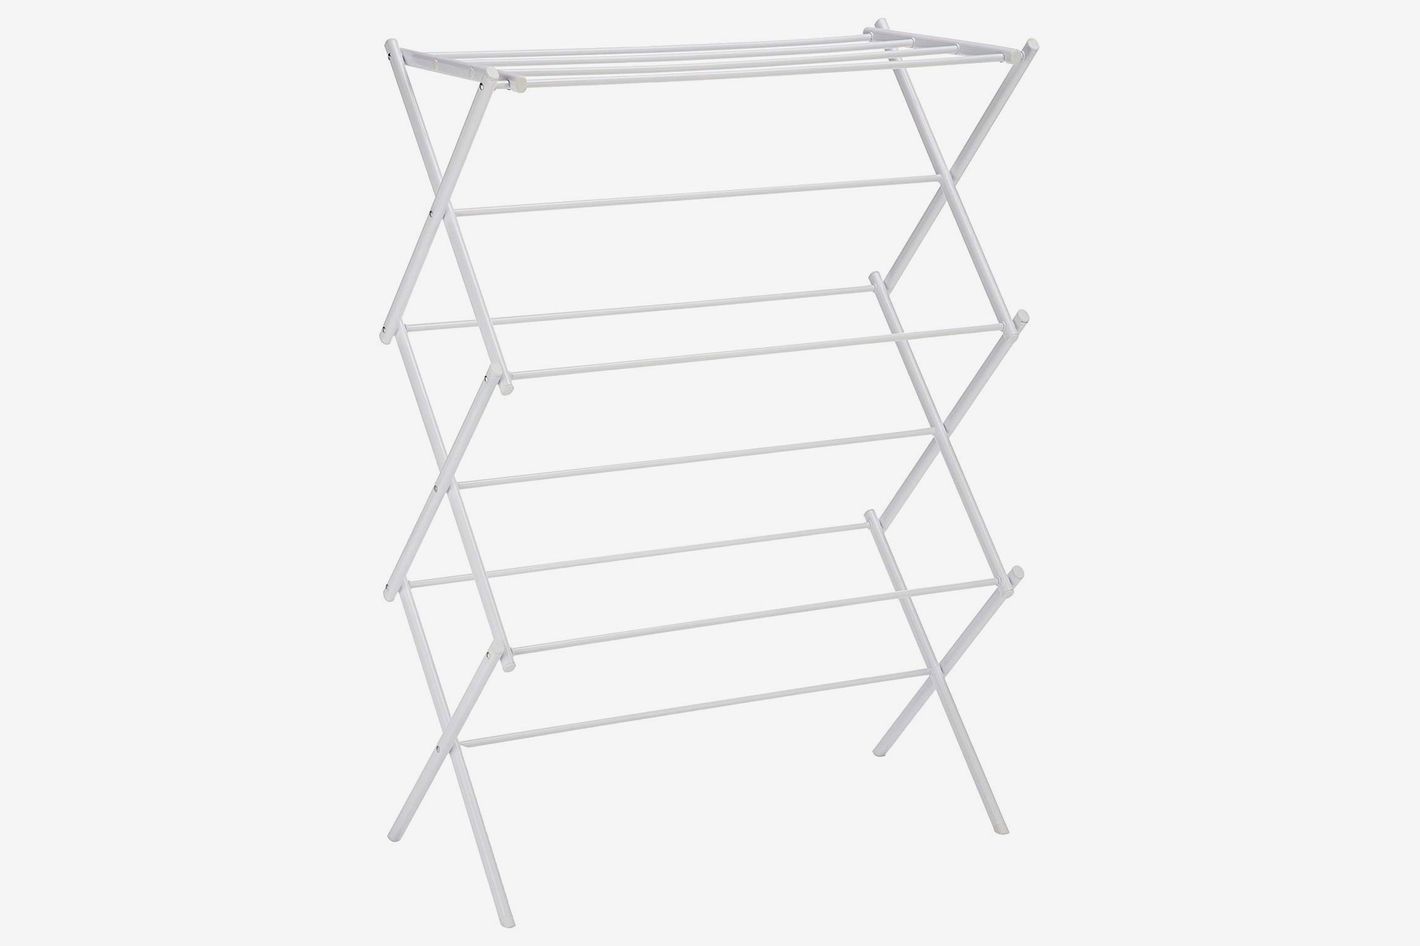 JAUREE Clothes Drying Rack Underwears Suitable for Socks Square, 40-Clips Drying Towels and Baby Clothes Stainless Steel Laundry Hanging Rack for Balcony and Courtyard